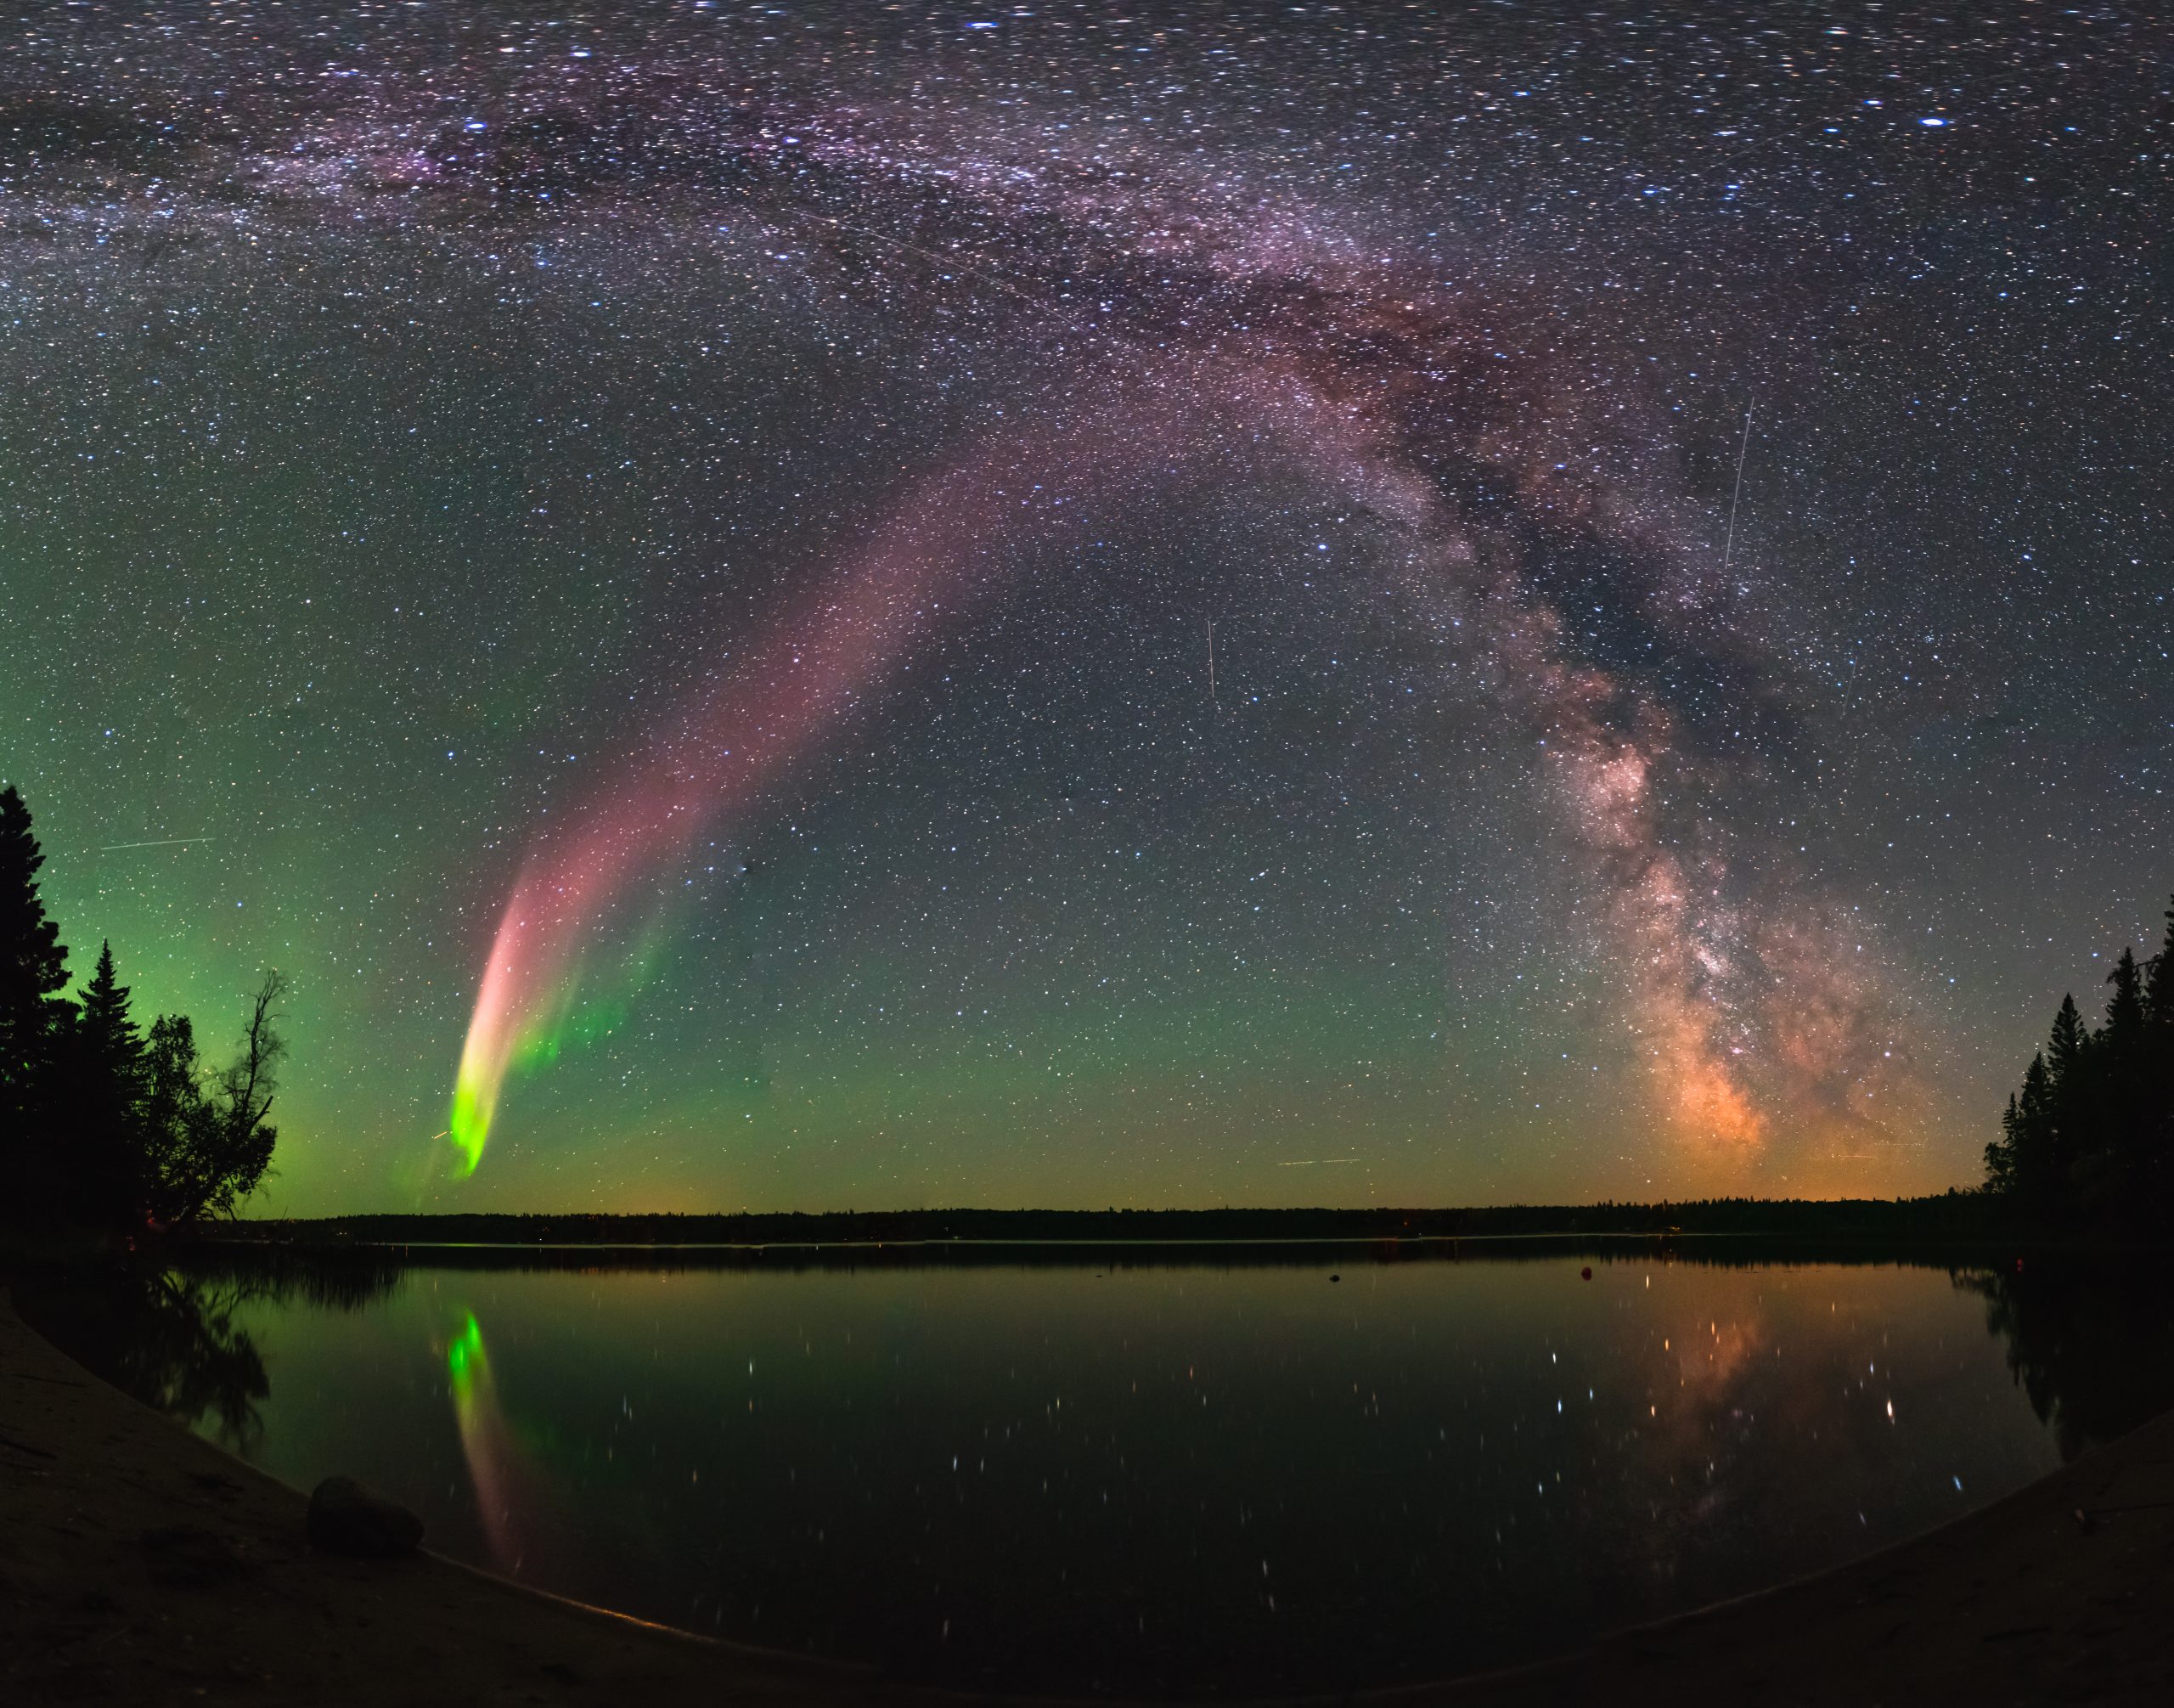 A composite image show the ‘steve’ aurora and the milky way over childs lake, manitoba, canada.